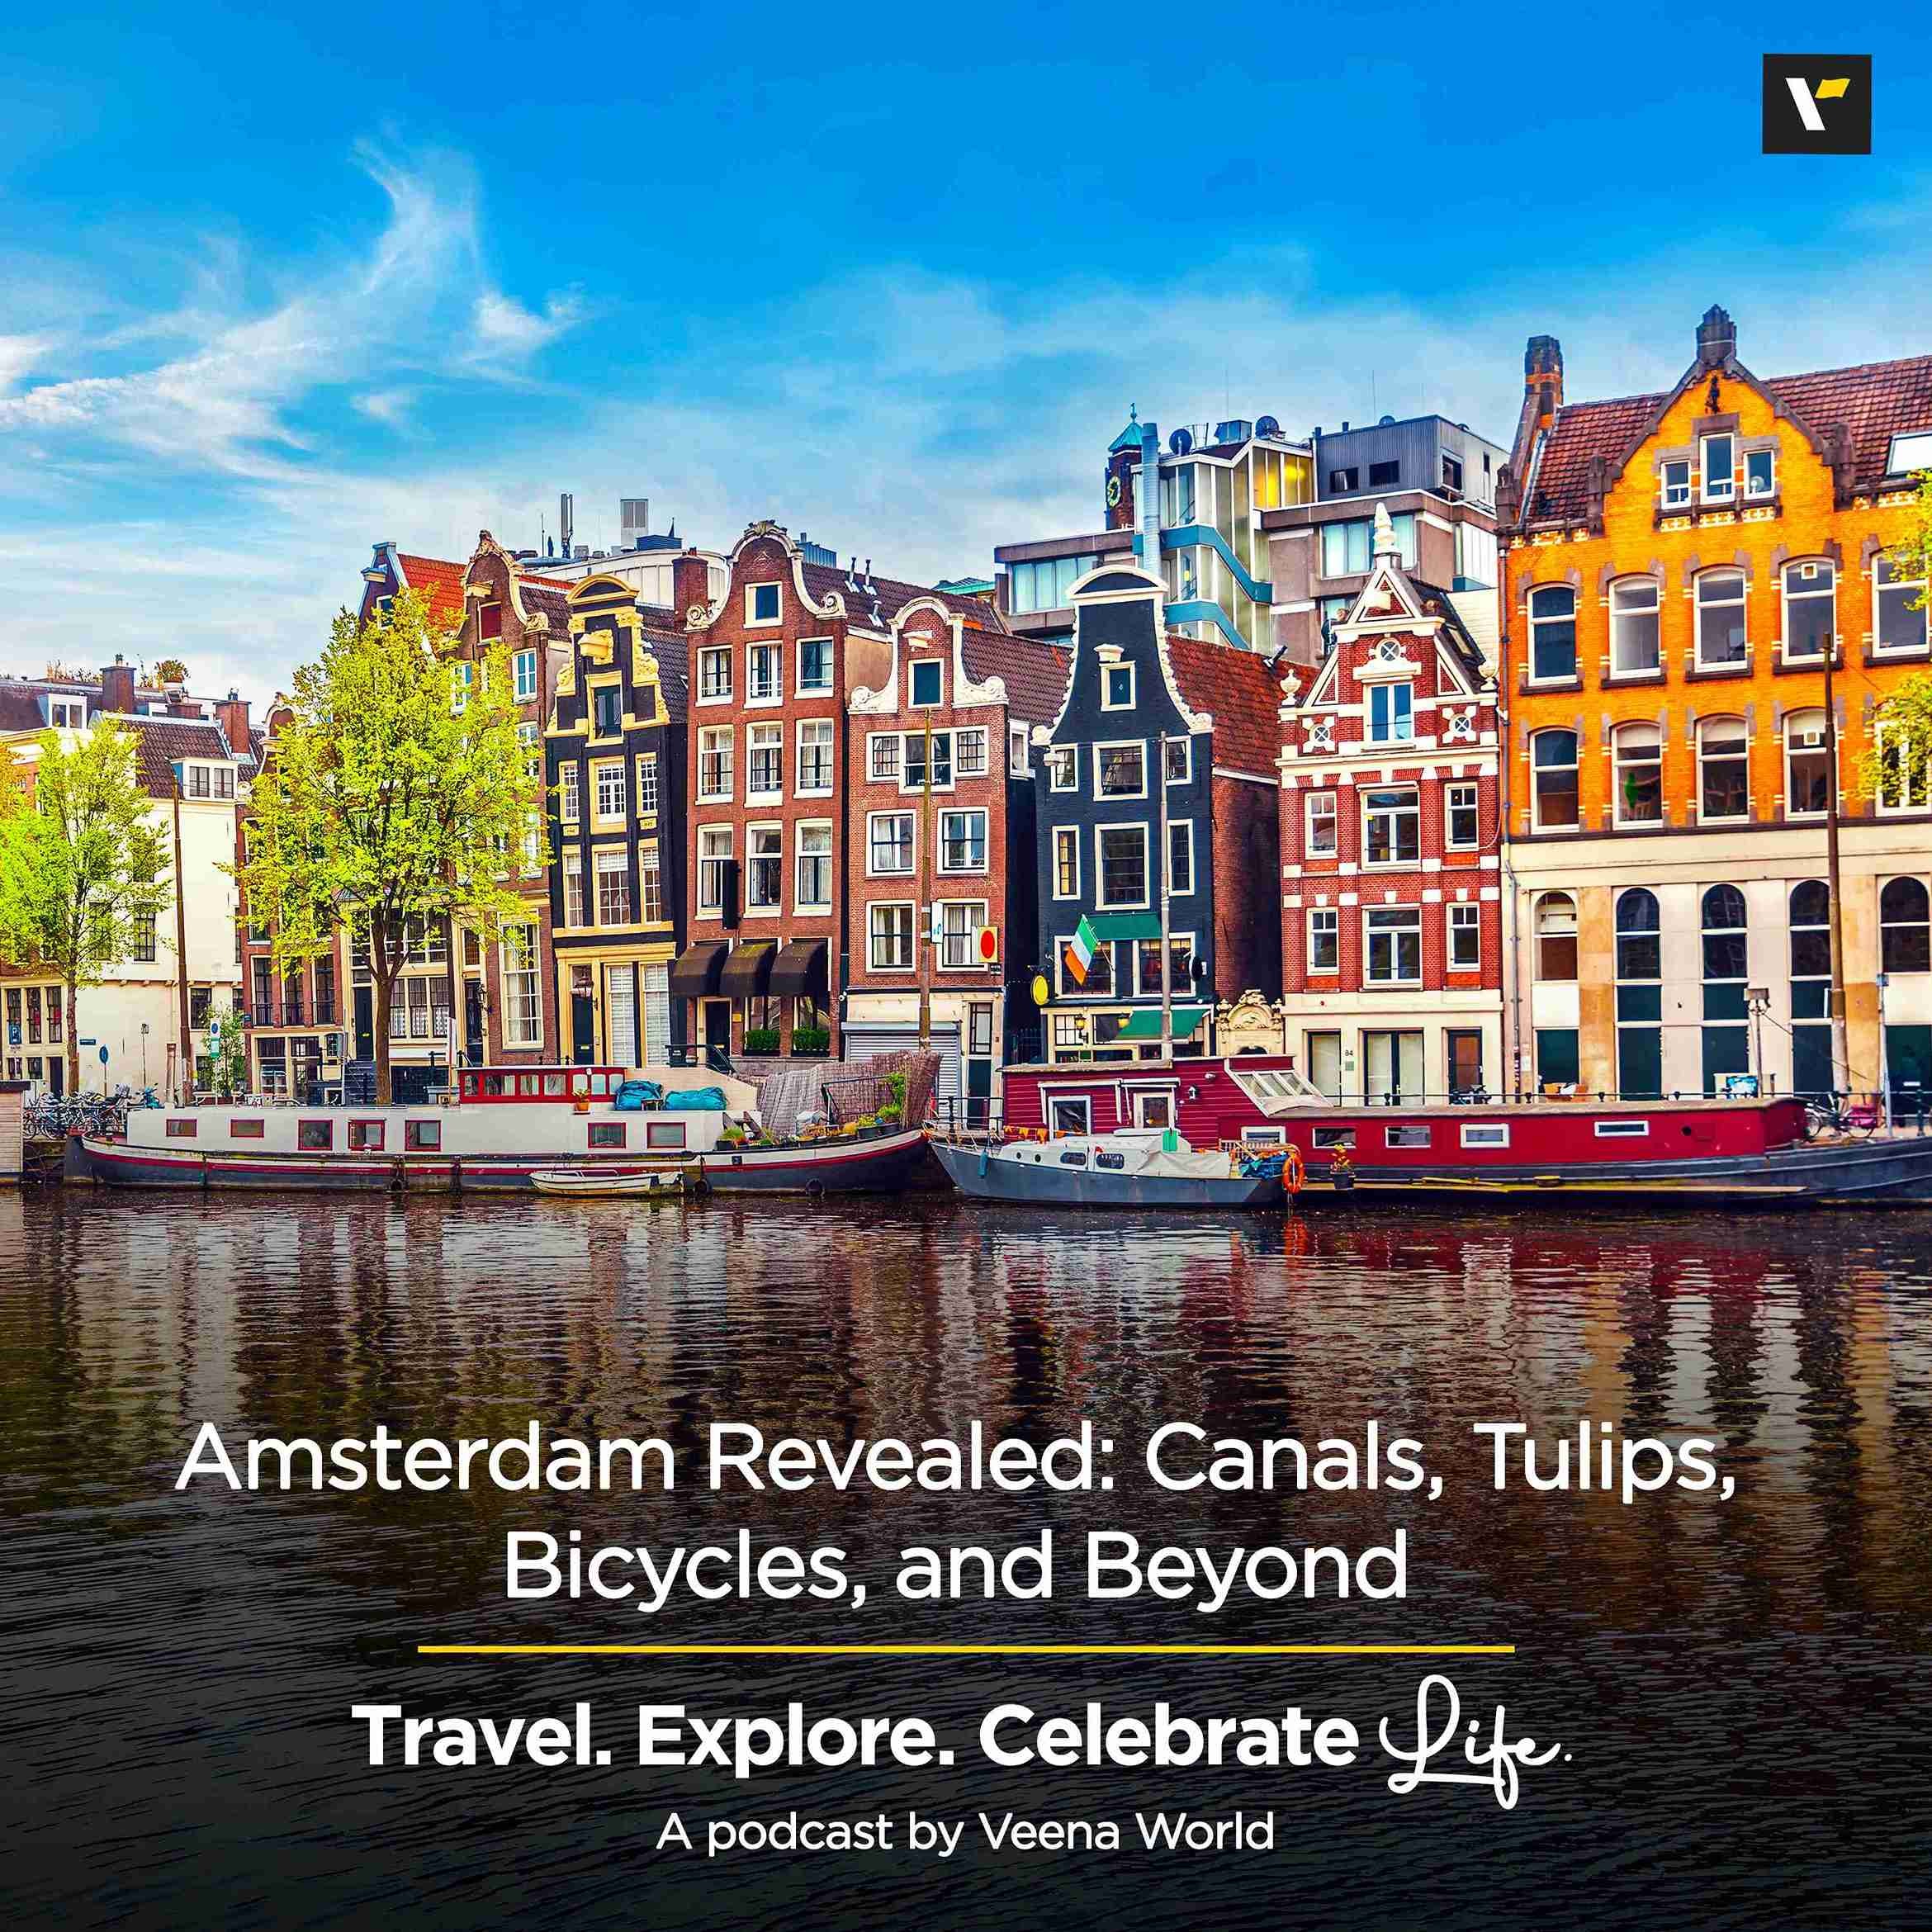 Amsterdam Revealed: Canals, Tulips, Bicycles, and Beyond | Travel Podcast by Veena World